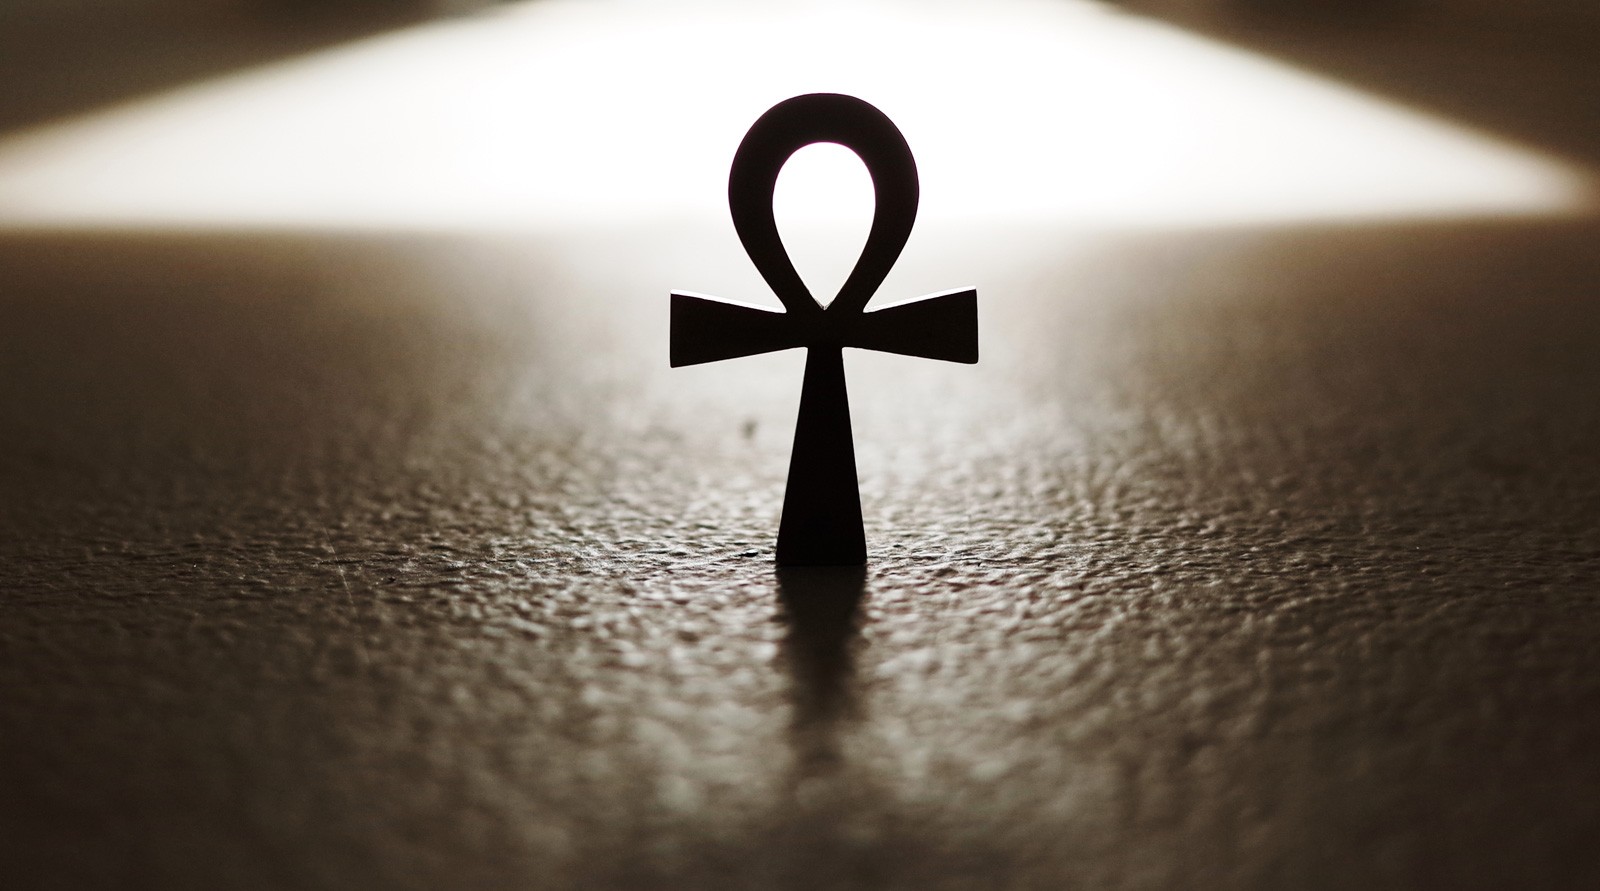 Ankh Tattoo Ideas and Ankh Meaning